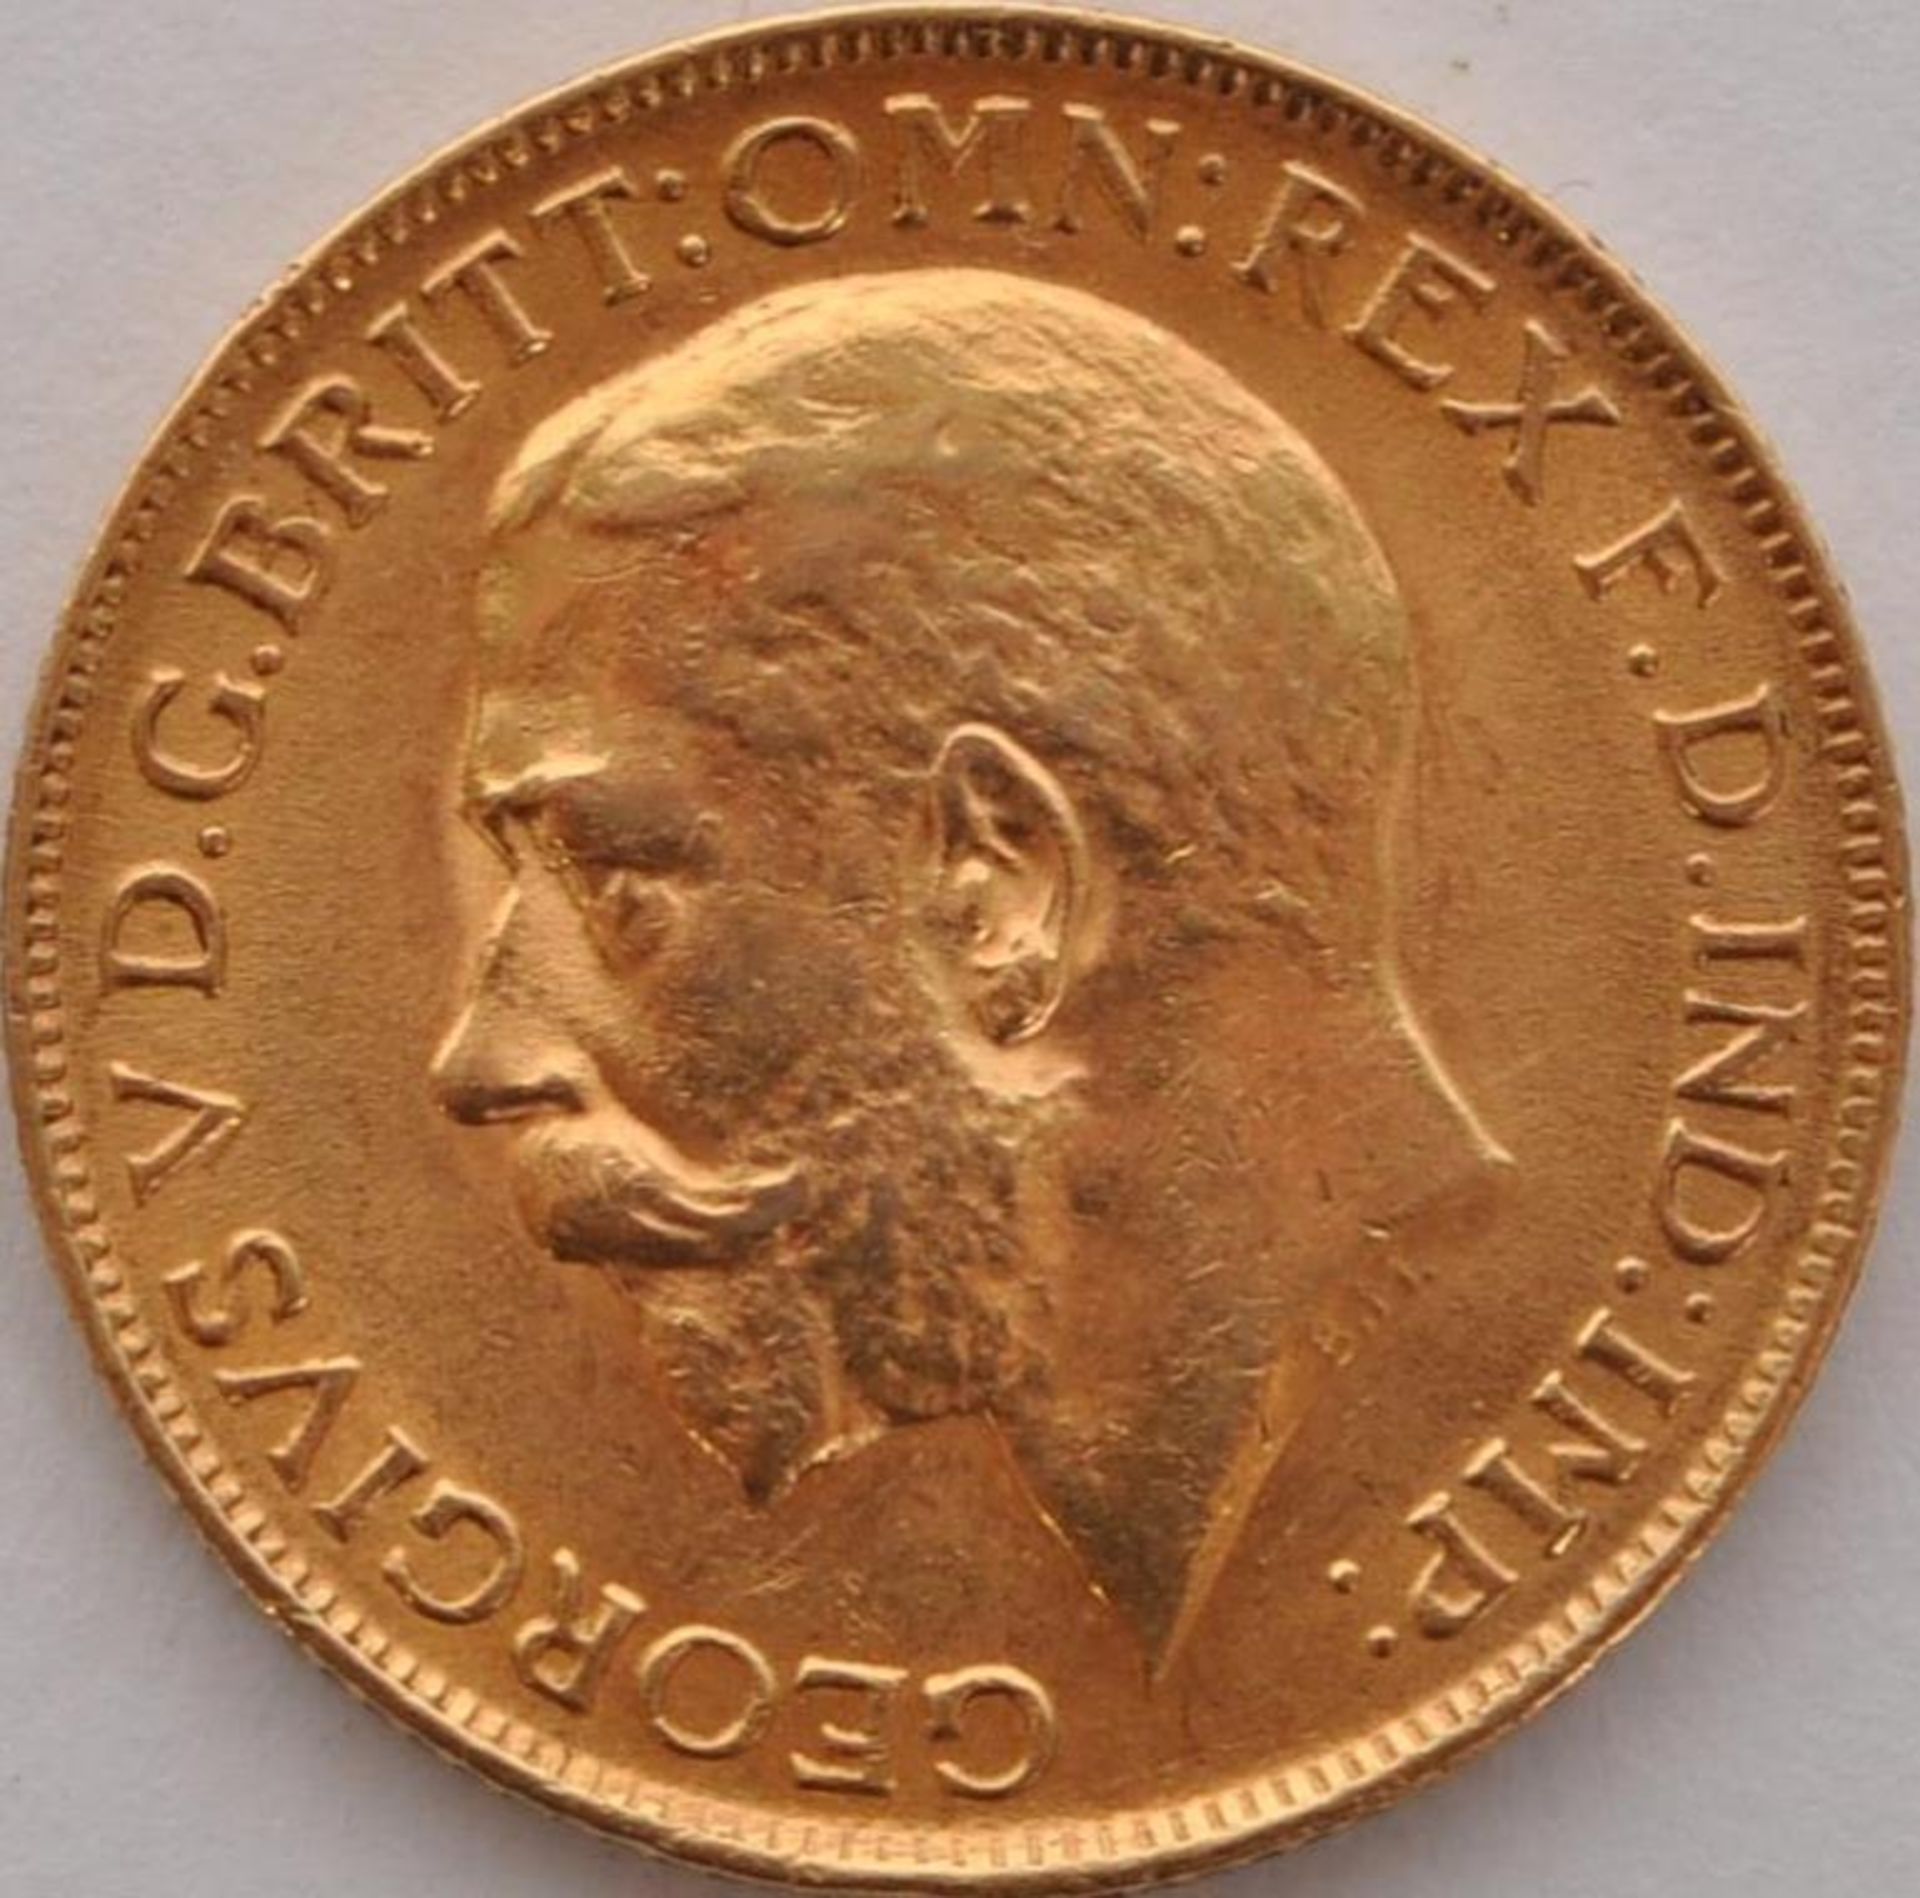 WITHDRAWN 22CT GOLD 1912 GEORGE V FULL SOVEREIGN COIN - Image 3 of 4